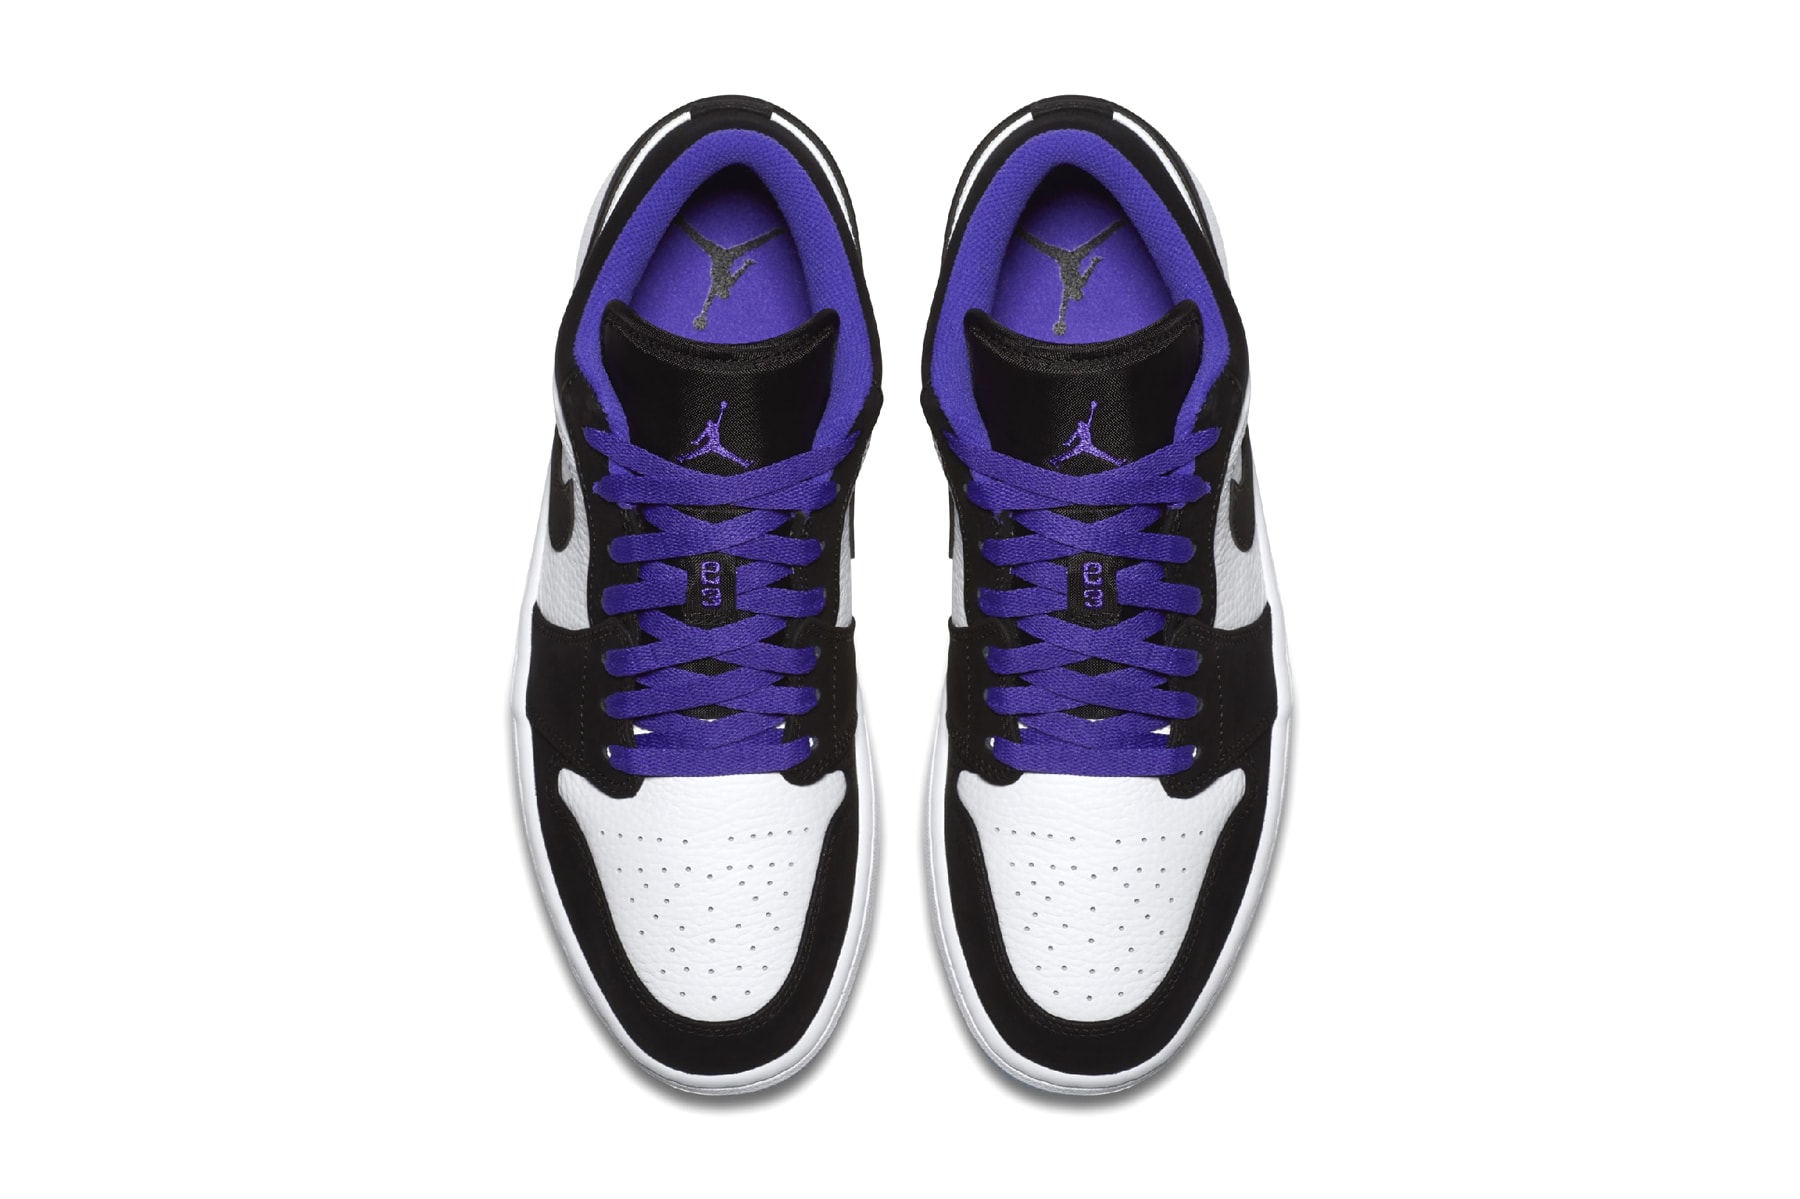 Air Jordan 1 Low New colorways 2018 fall tiffany space jam blue purple sneakers release date price info first look purchase